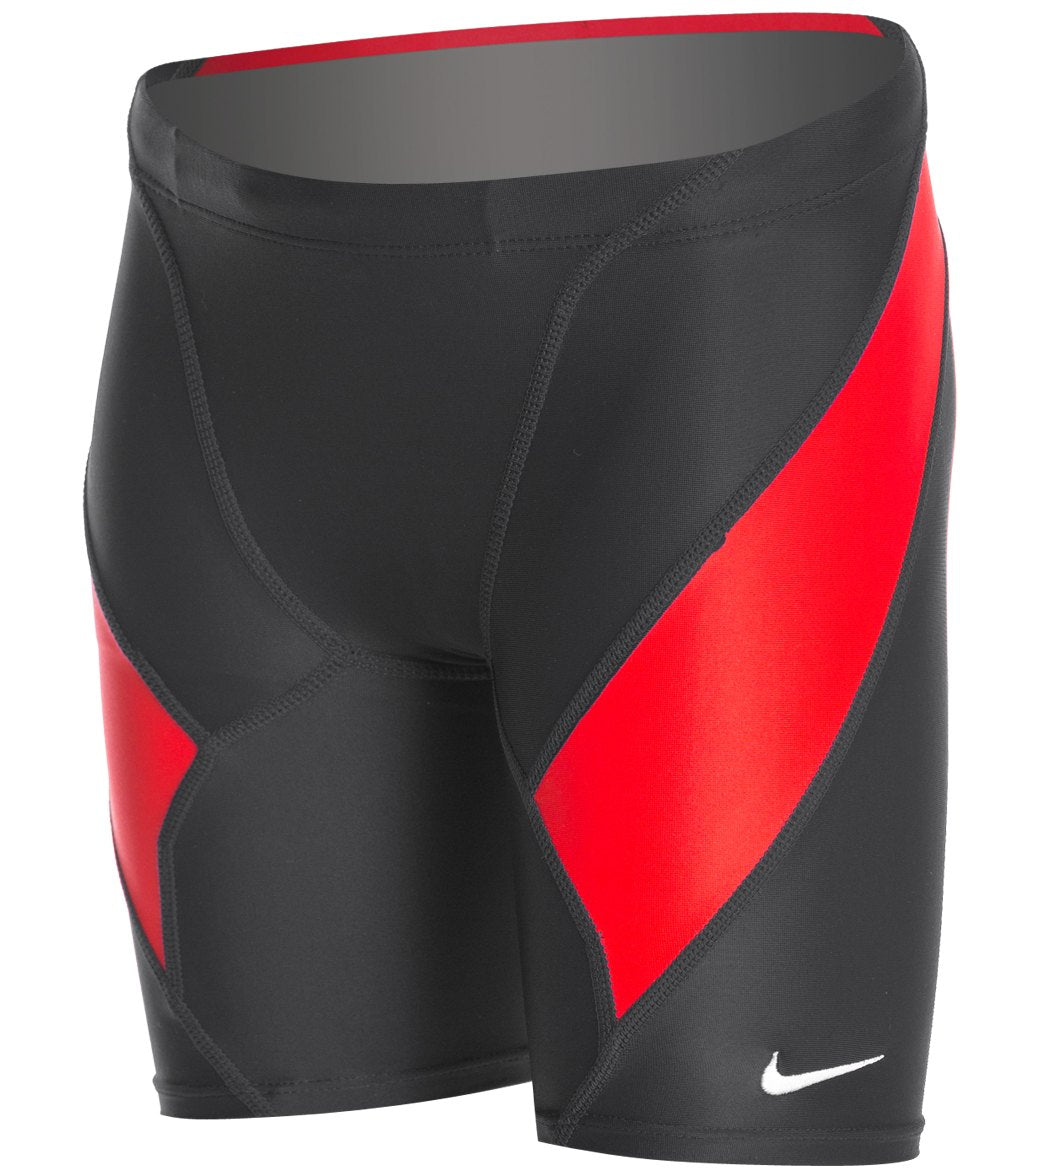 Nike Swim Boys' Victory Color Block Jammer Swimsuit at SwimOutlet.com